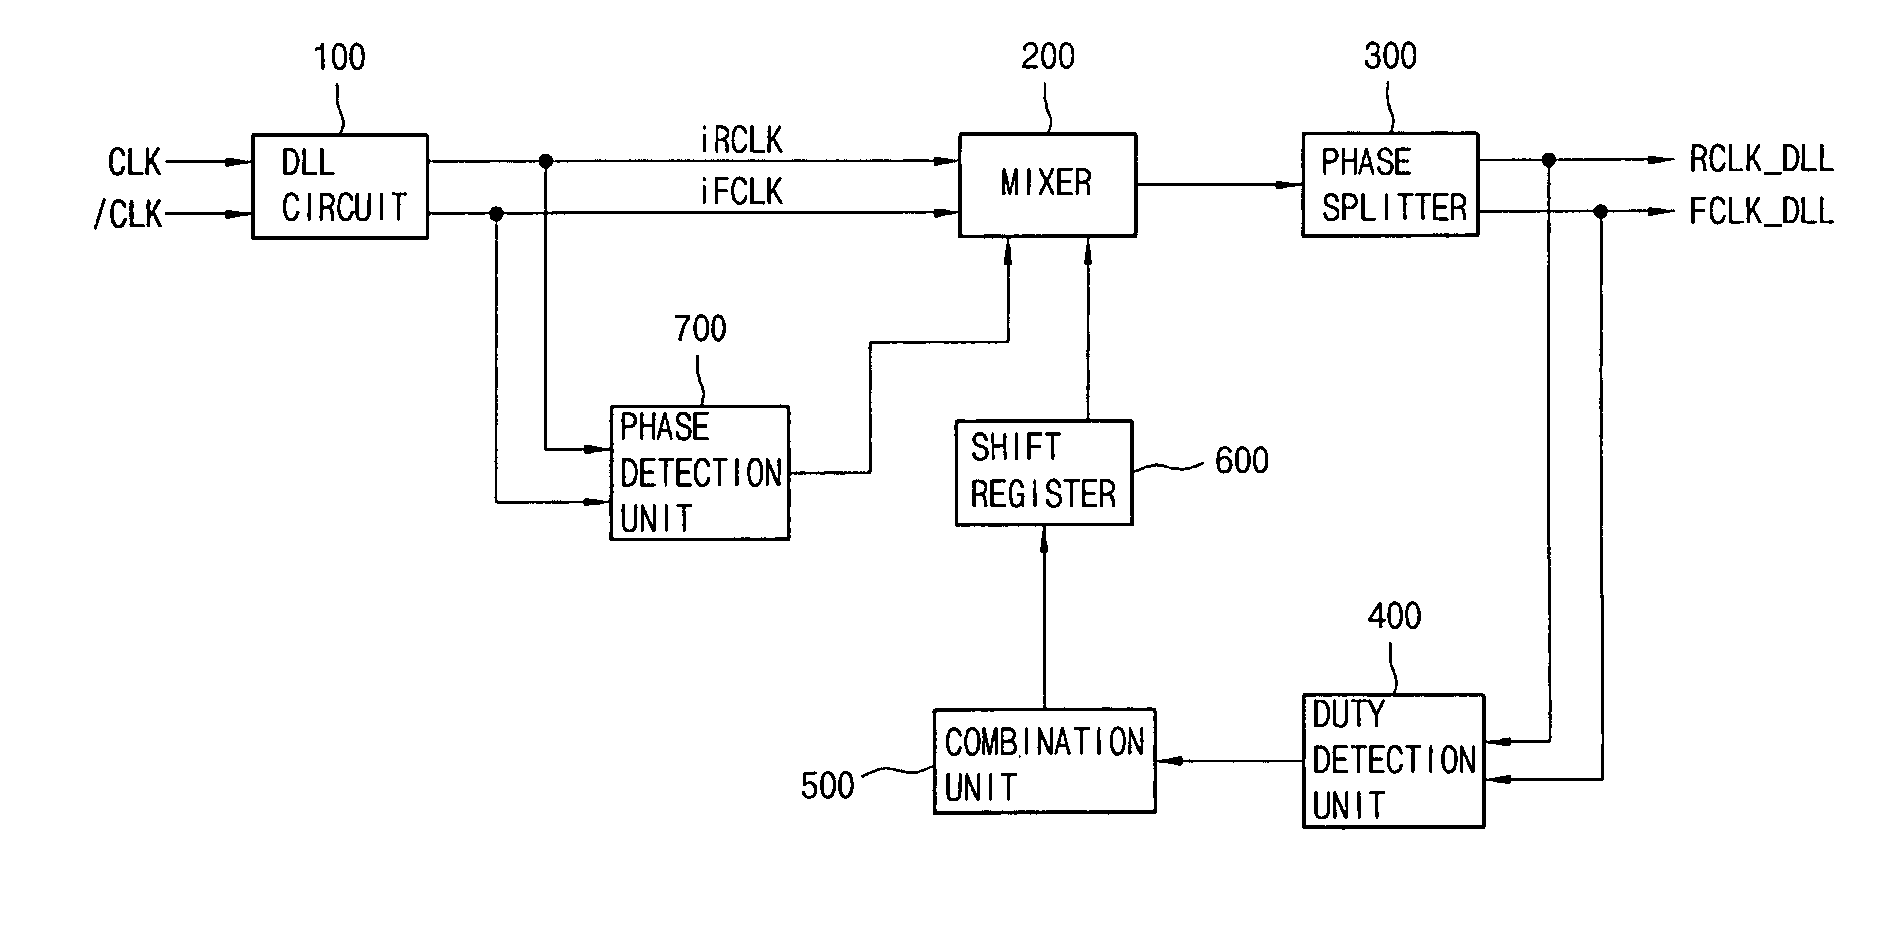 Duty cycle correction device